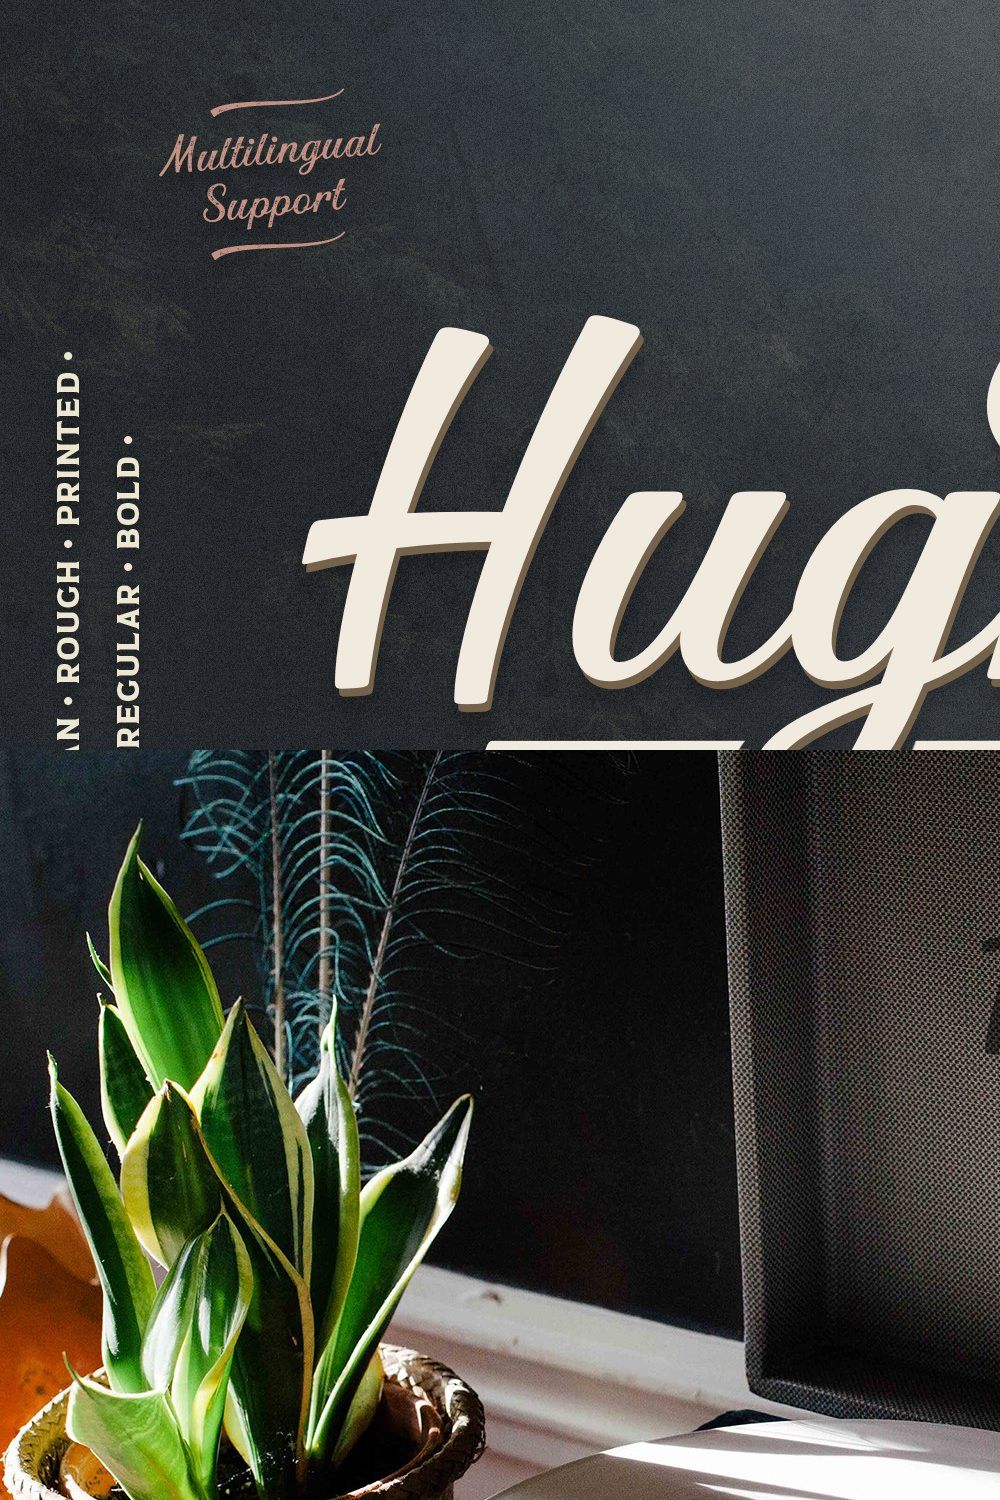 Hughes pinterest preview image.